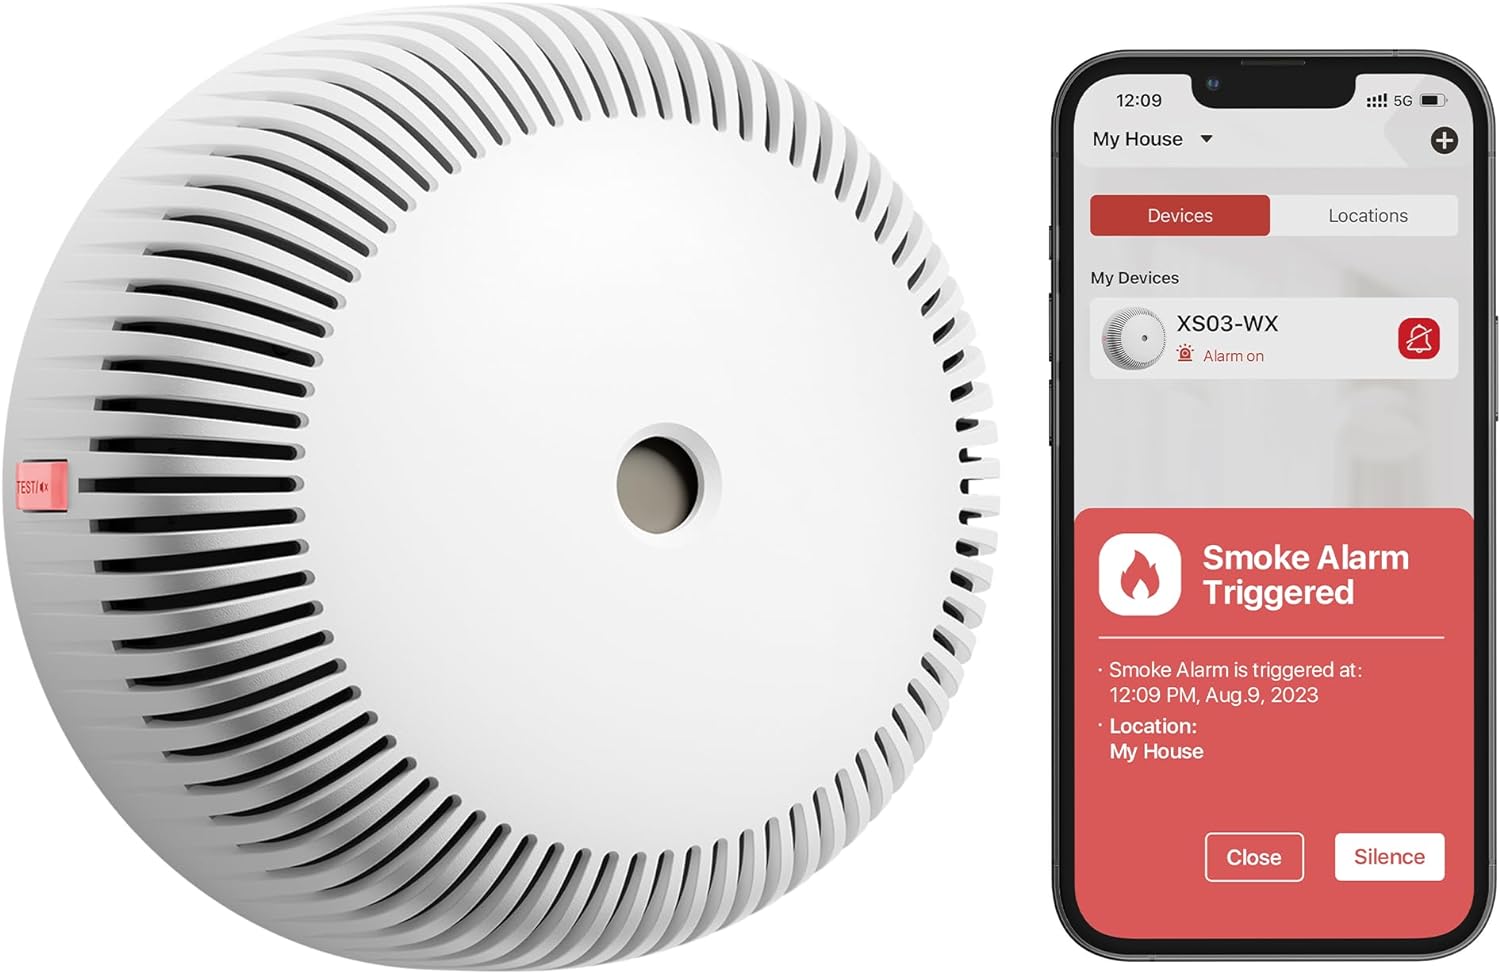 You can control this smoke detector remotely through a mobile app